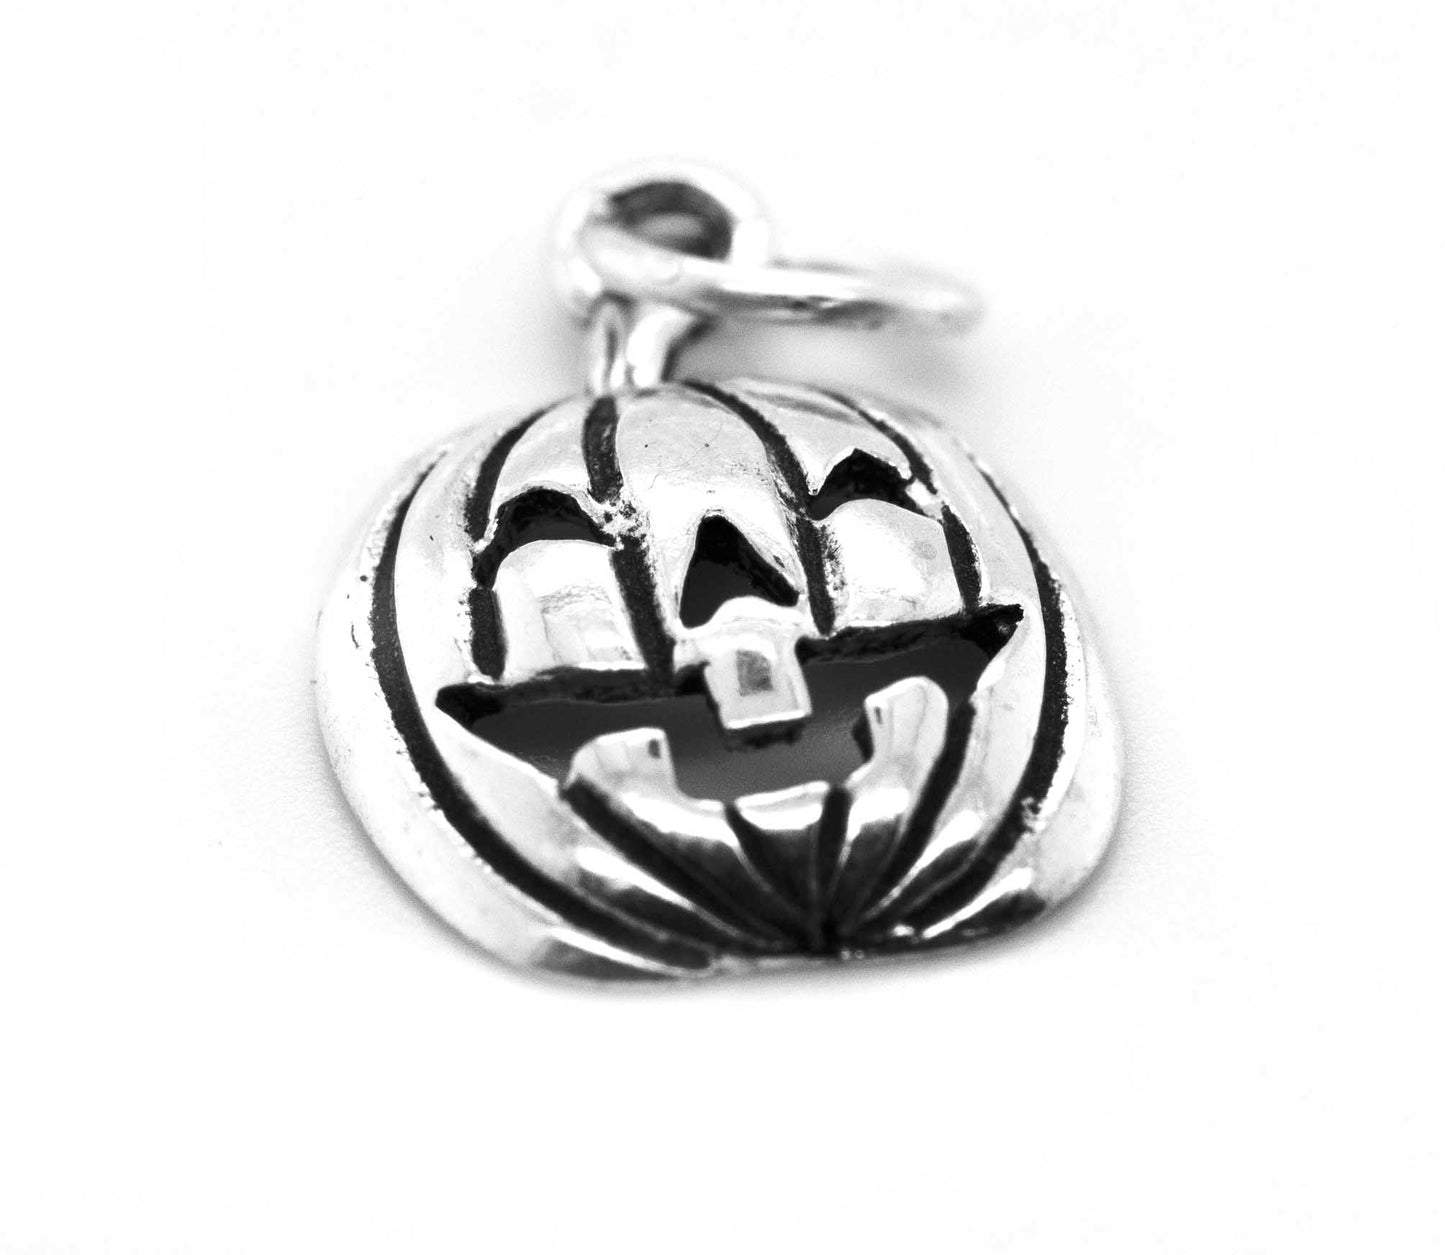 A Halloween-themed, Super Silver Jack O' Lantern Charm on a white surface.